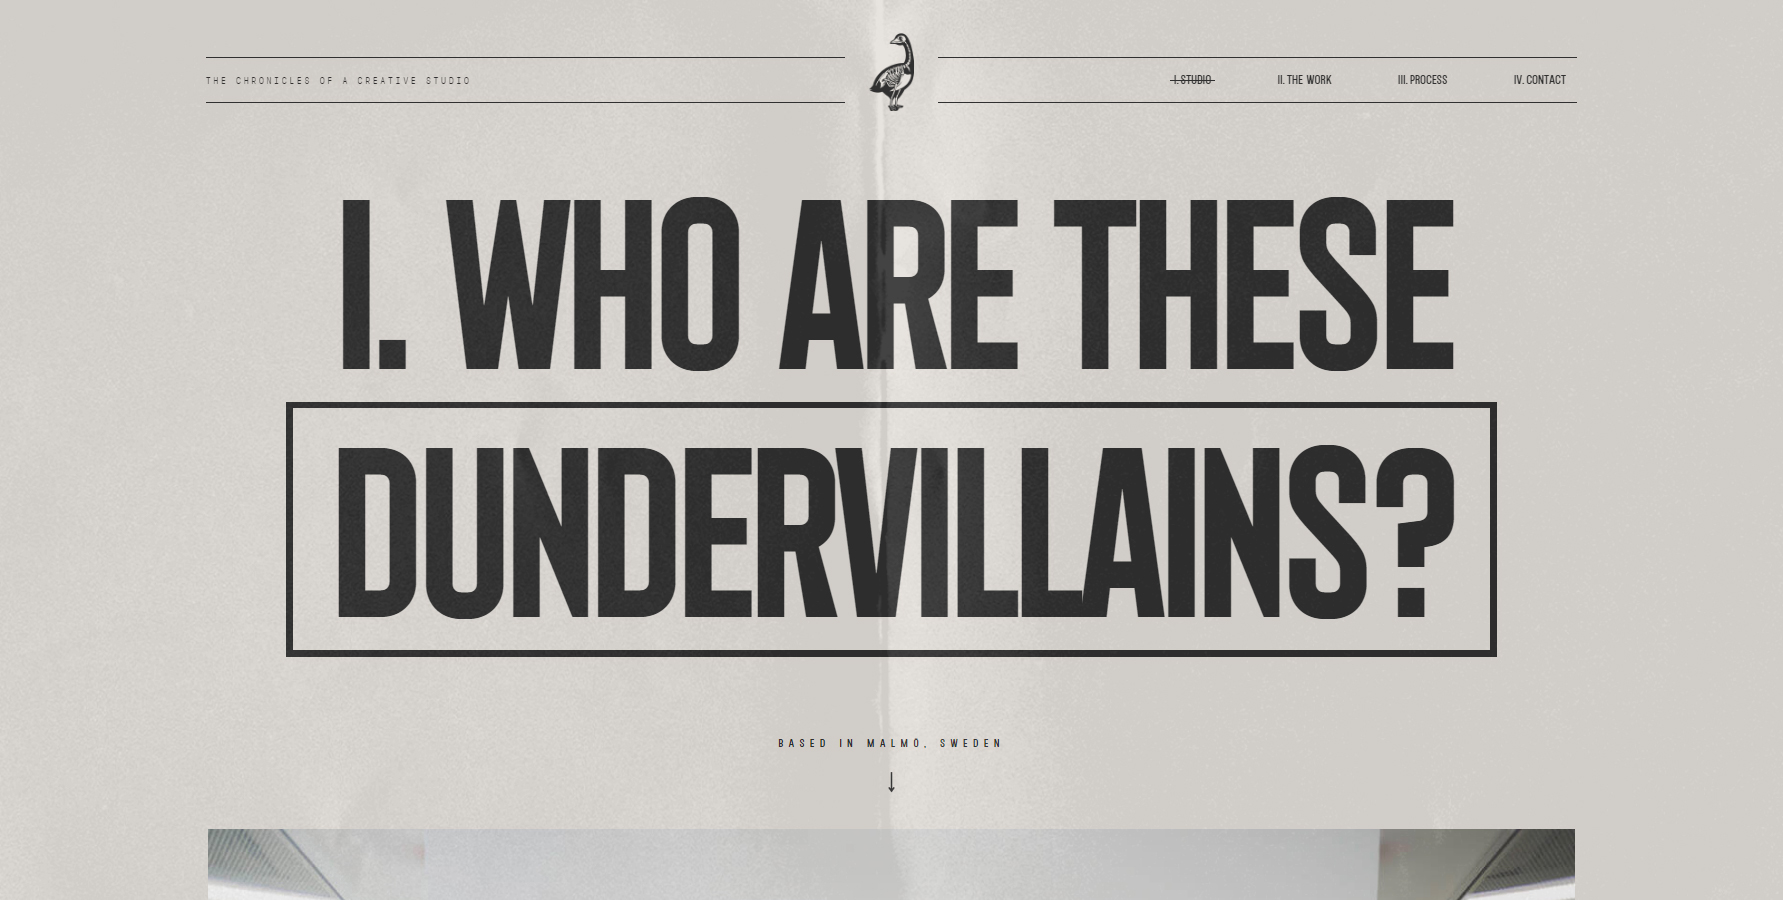 Dunderville.se - Website of the Day